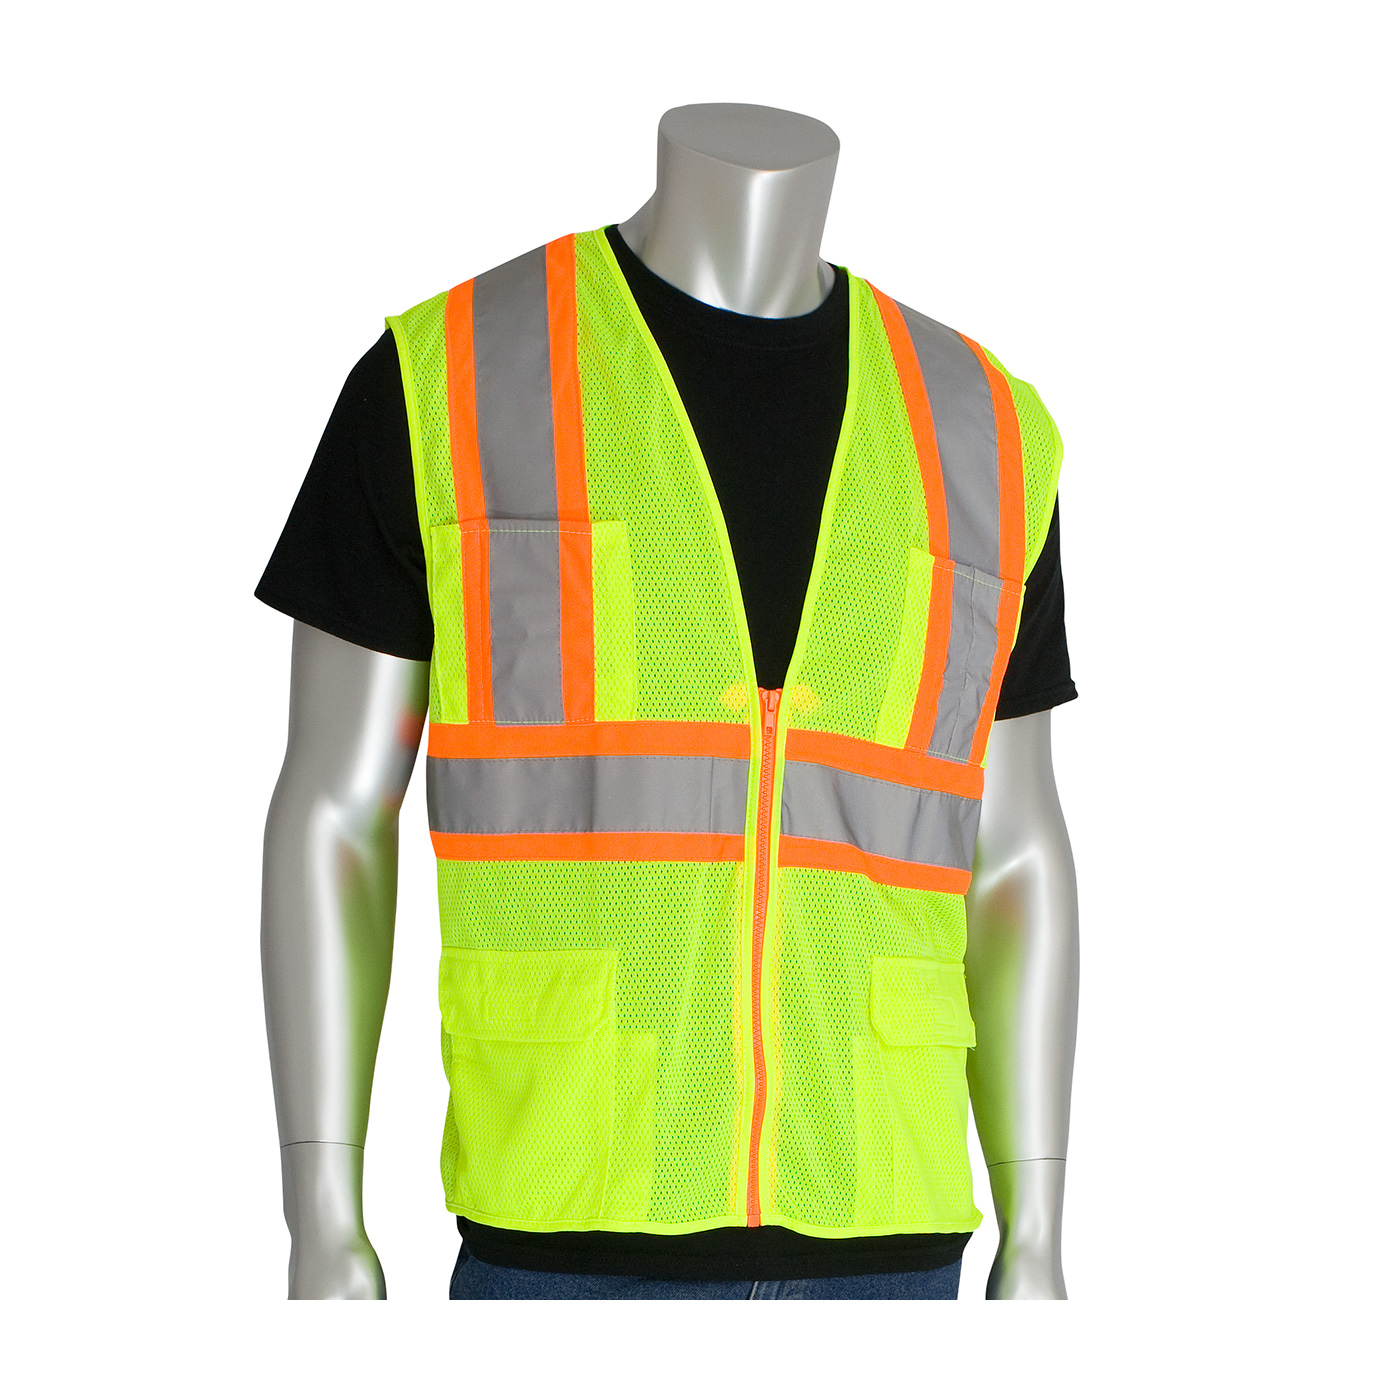 PIP 302-MAPMLY-XL ANSI Type R Class 2 Yellow Two-Tone Eleven Pocket Premium Mesh Surveyors Vest - X-Large PID-302 MAPM LY XL